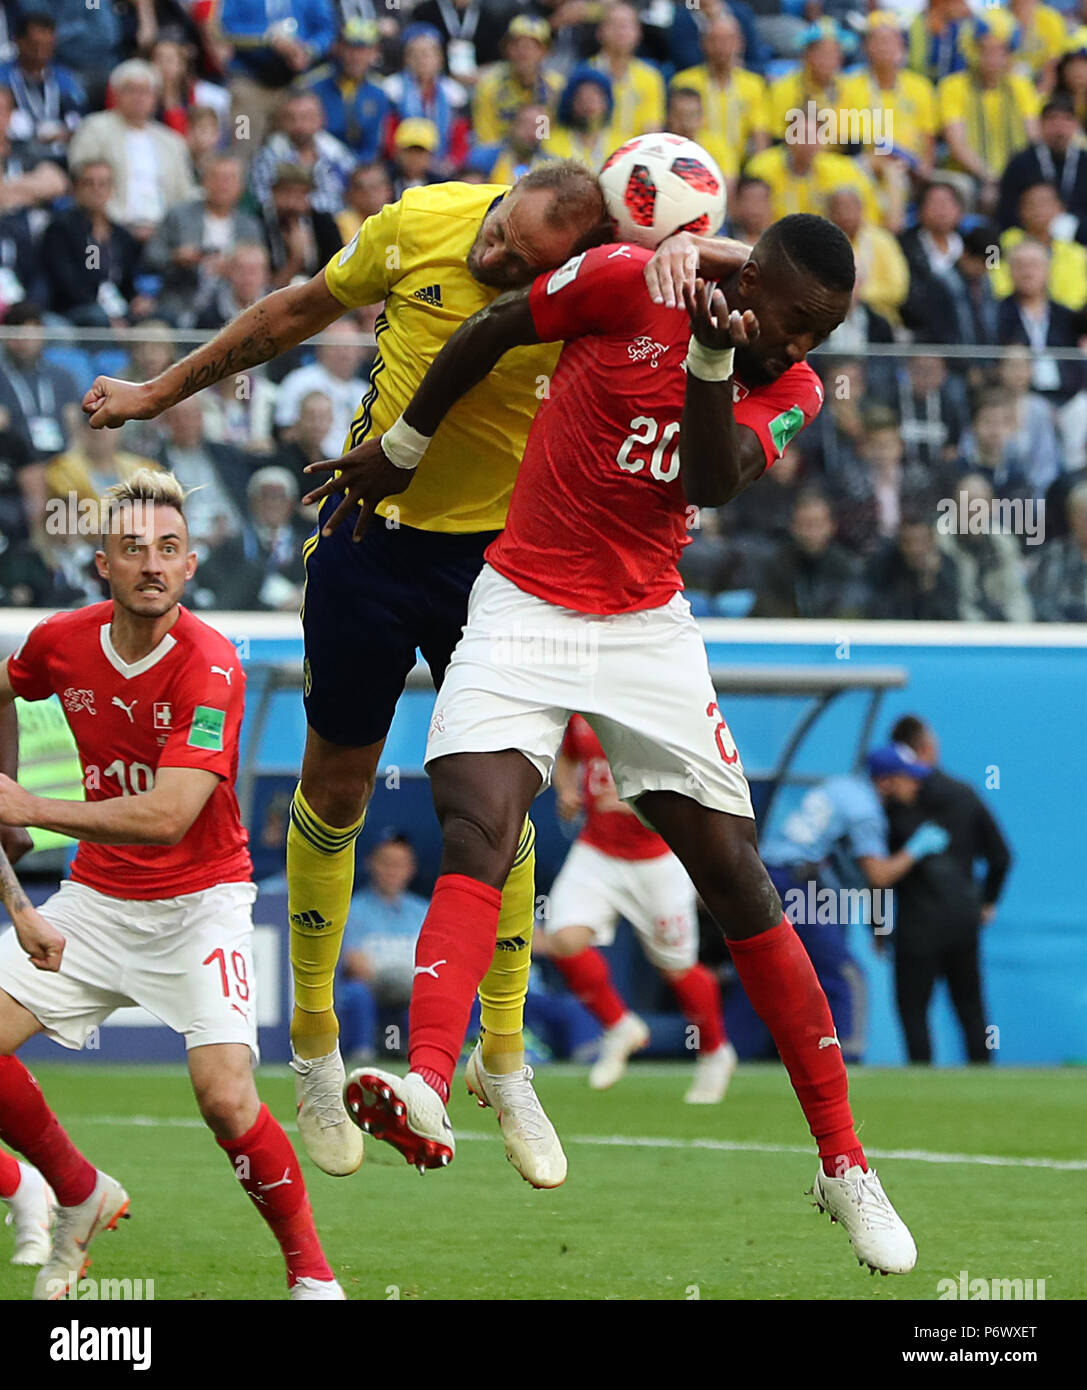 Saint Petersburg, Russia. 3rd July, 2018. Johan Djourou (R) of Switzerland competes for a header with Andreas Granqvist of Sweden during the 2018 FIFA World Cup round of 16 match between Switzerland and Sweden in Saint Petersburg, Russia, July 3, 2018. Sweden won 1-0 and advanced to the quarter-final. Credit: Yang Lei/Xinhua/Alamy Live News Stock Photo